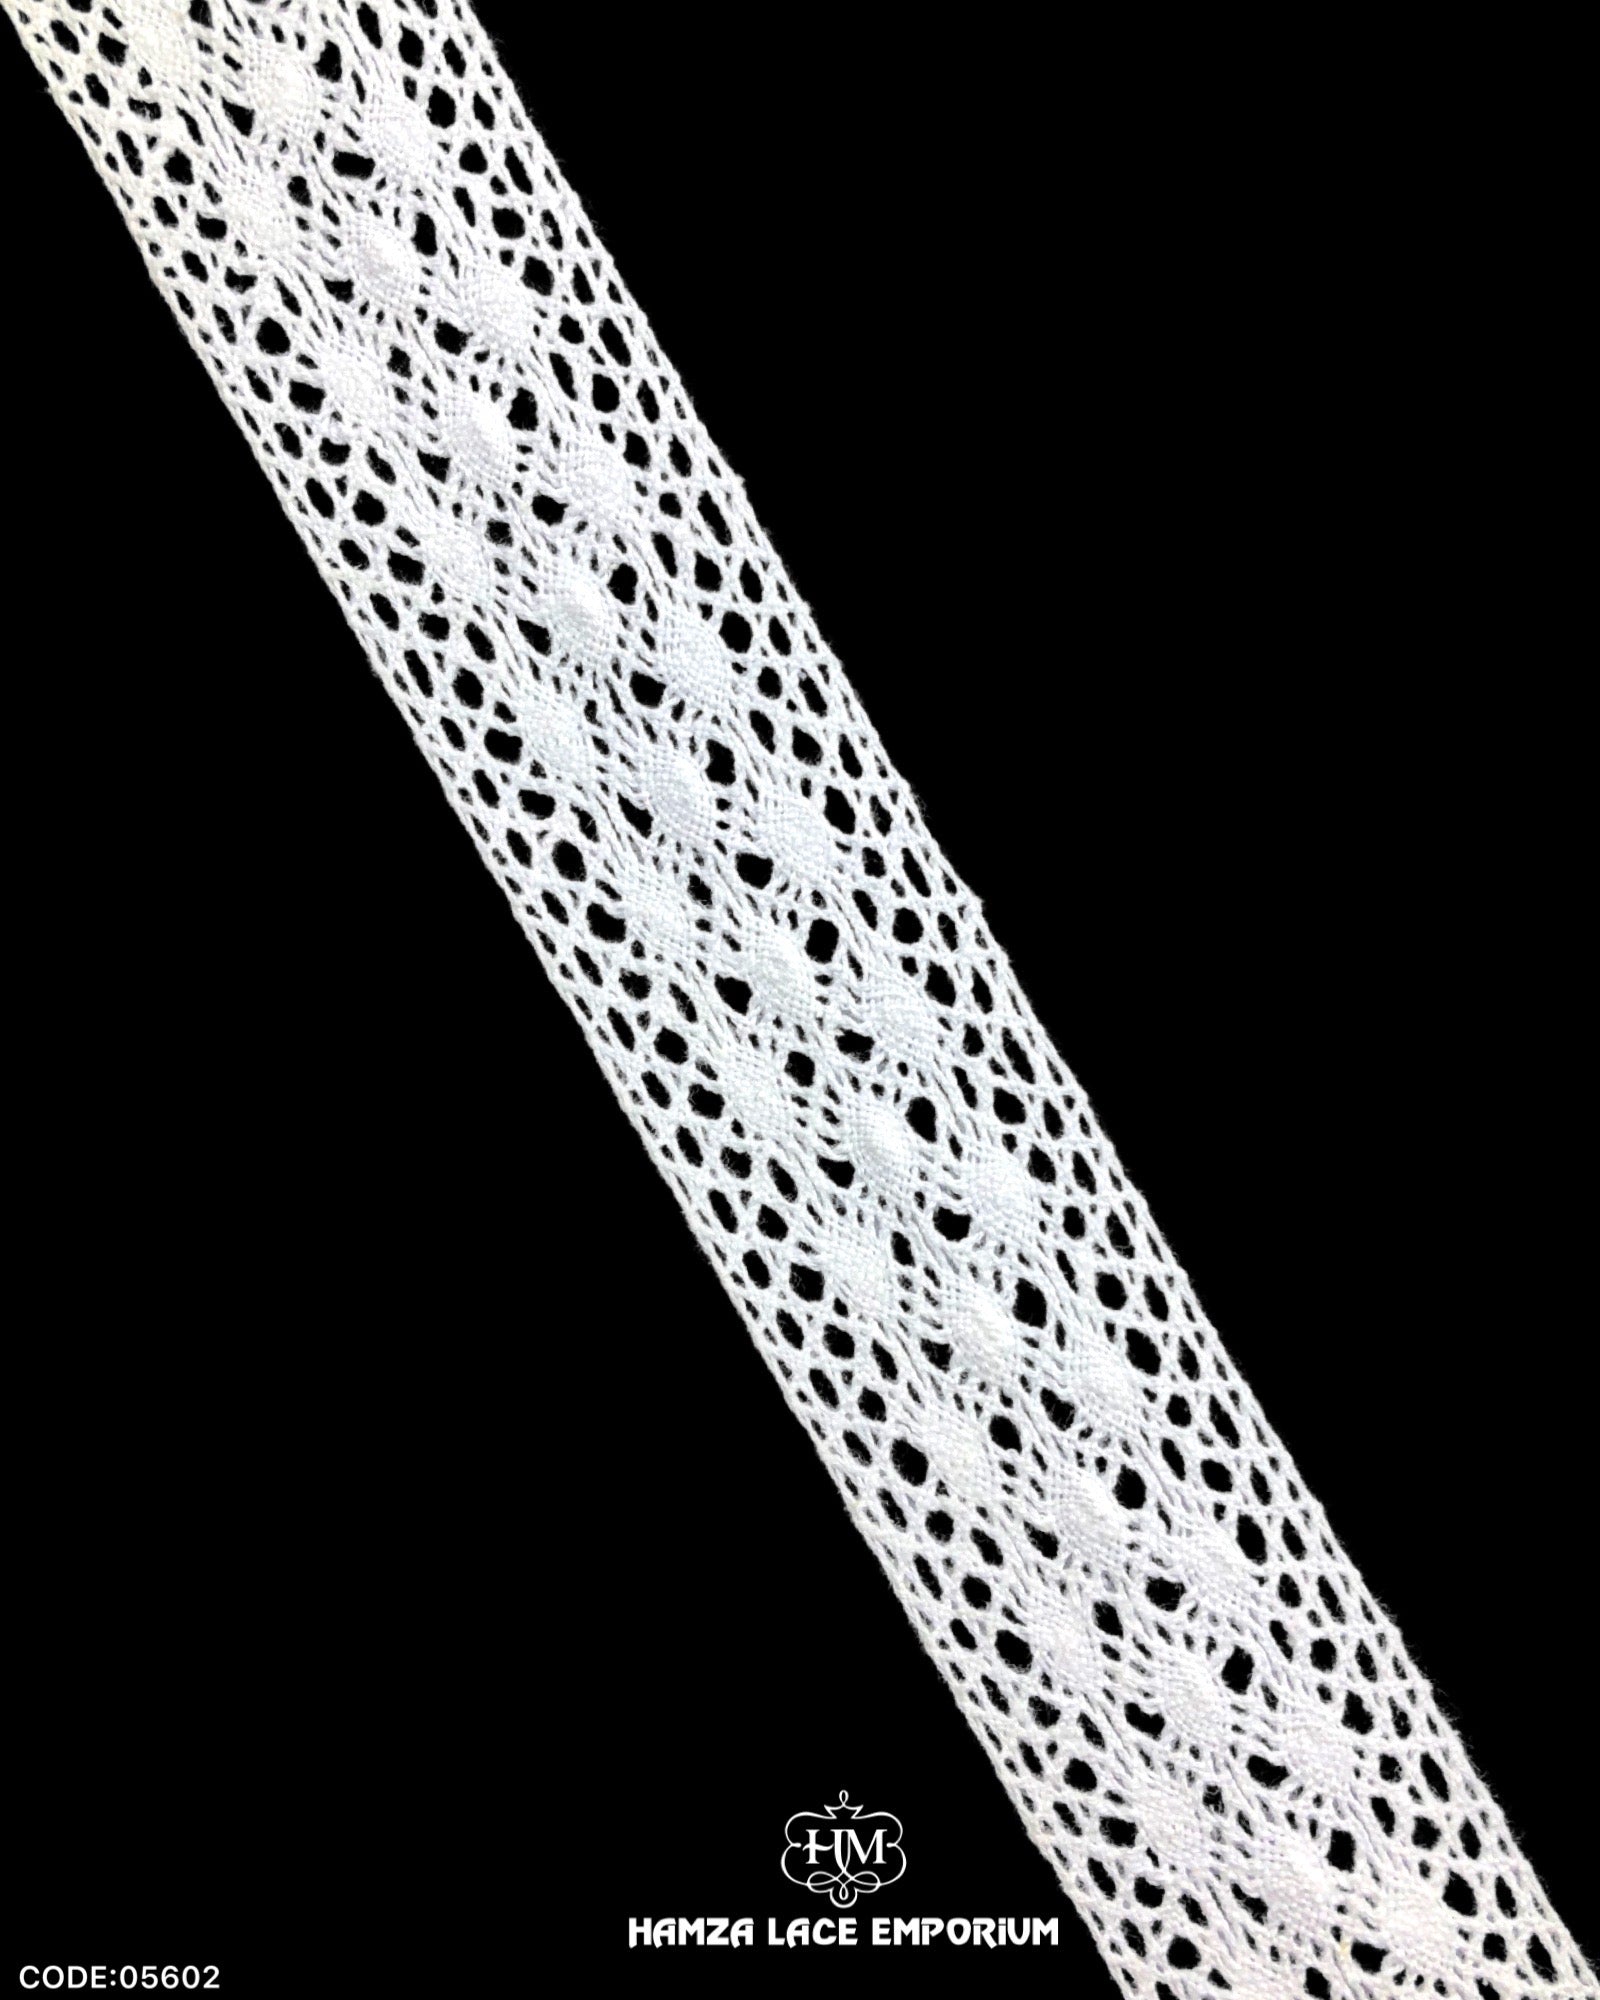 'Center Filling Crochet Lace 05602' with the name 'Hamza Lace' written at the bottom